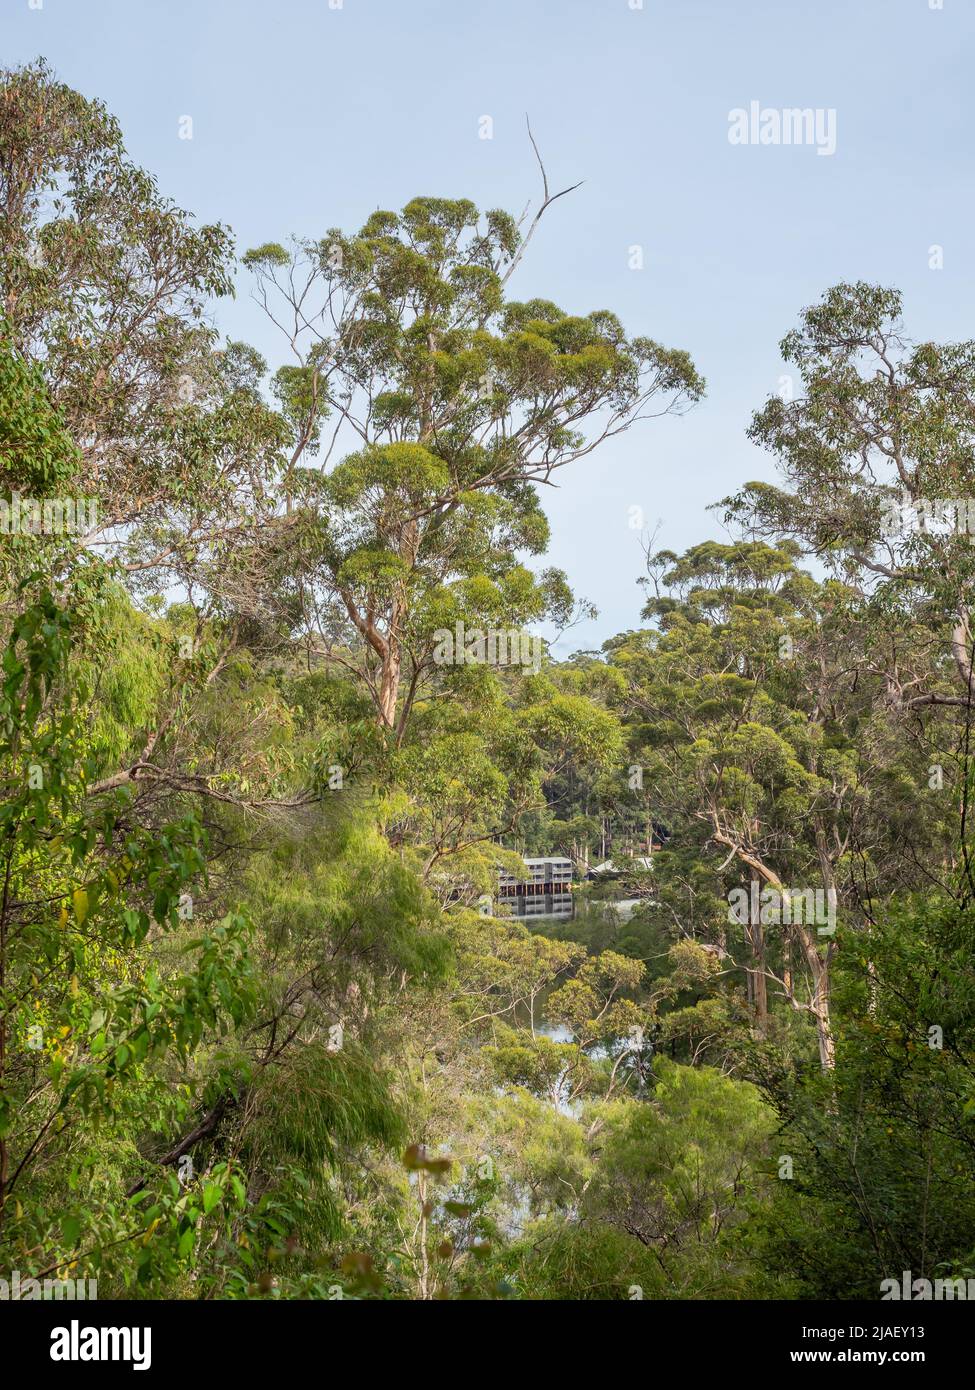 Lake Beedelup, near Pemberton in Western Australia, is surrounded by a majestic Karri Forest. Stock Photo